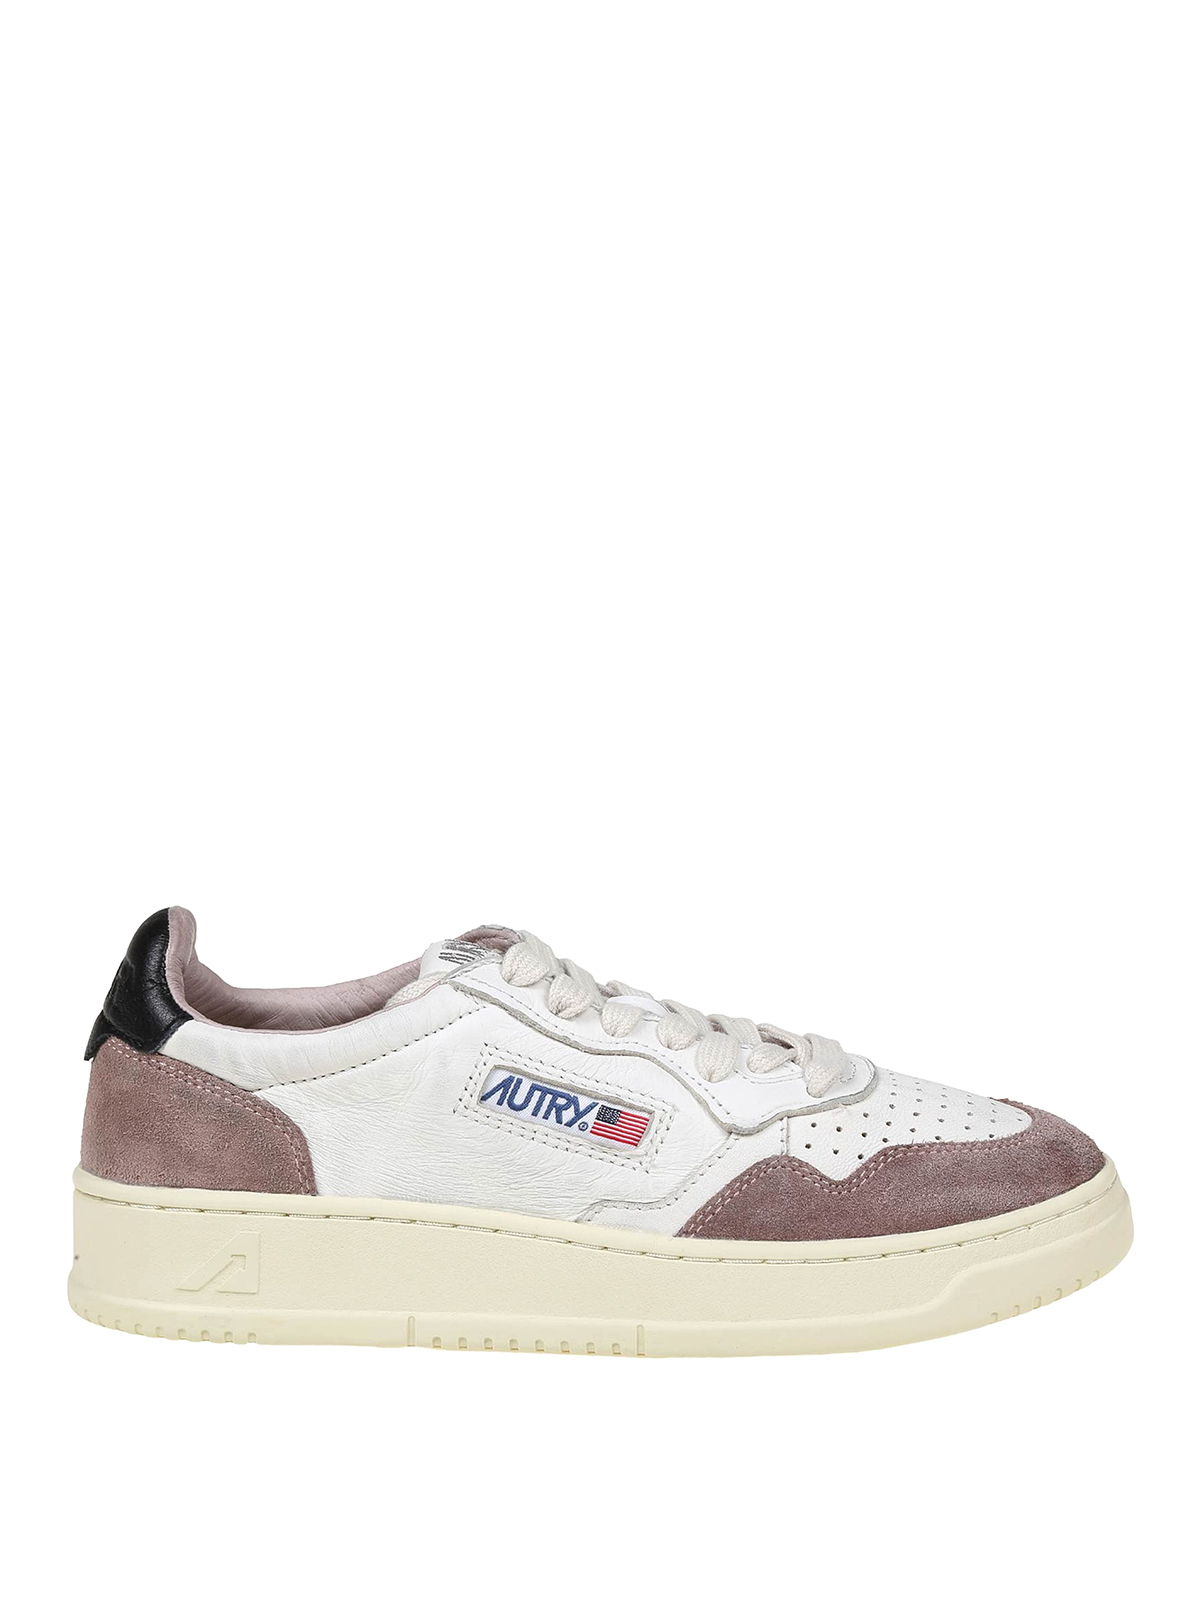 Trainers Autry - Autry sneakers in white leather and suede - AULWGS20